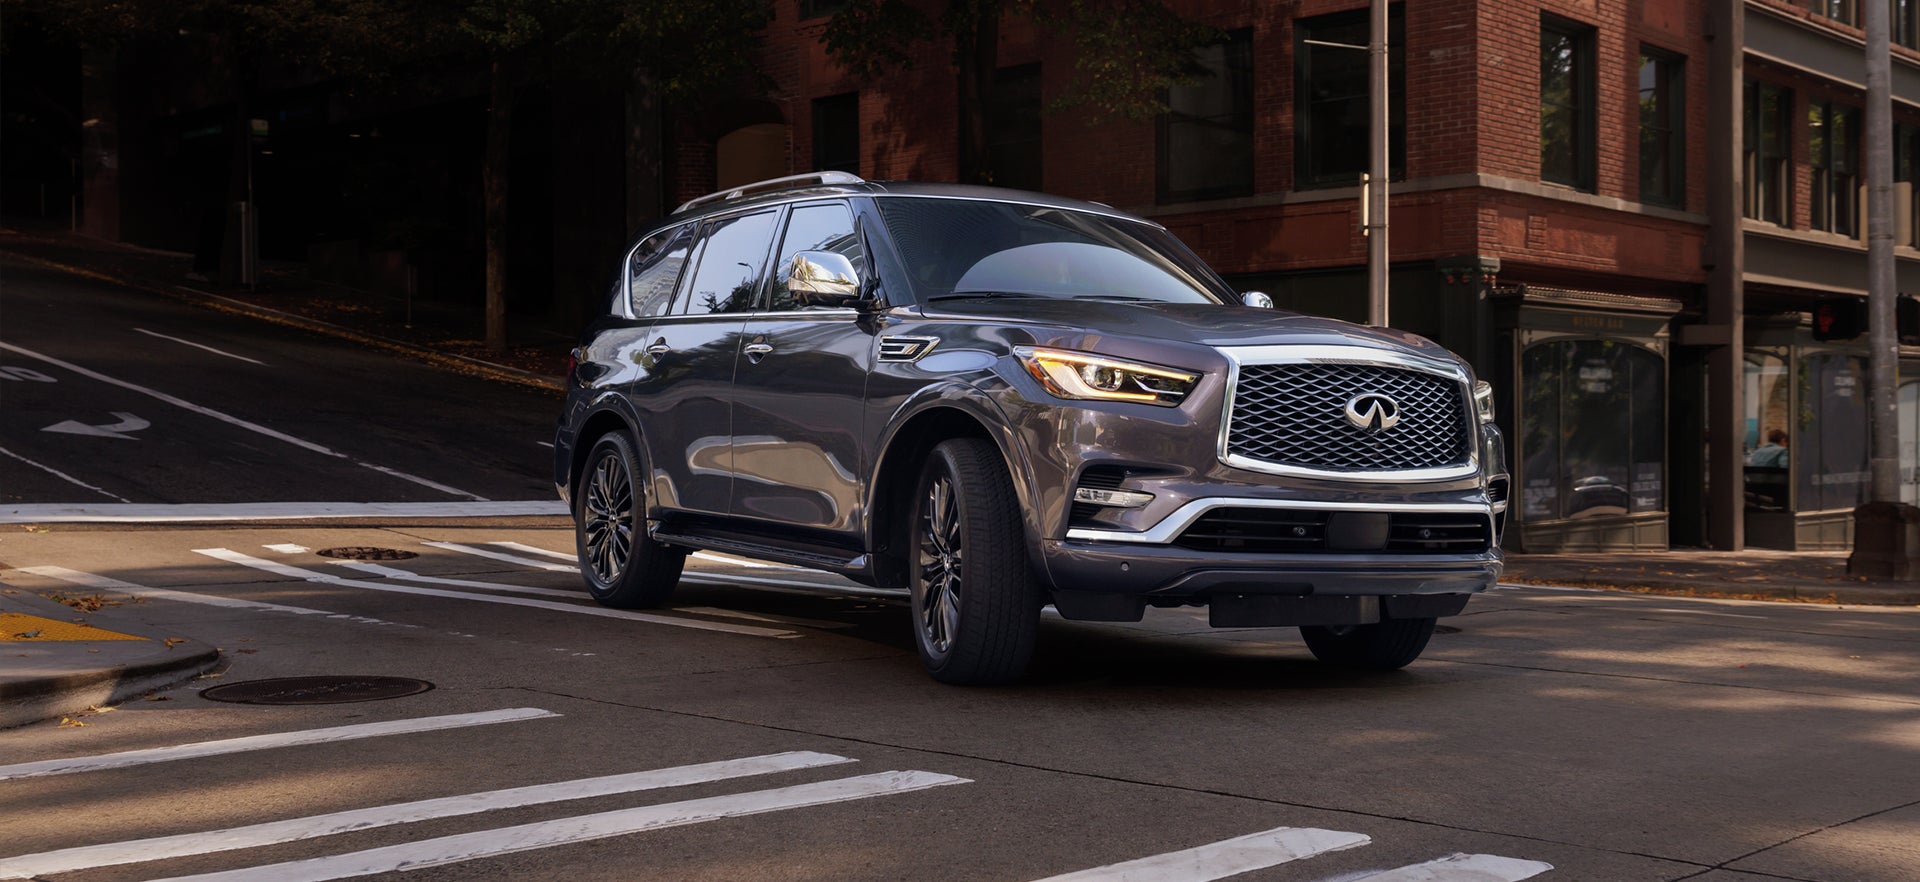 QX80 | INFINITI of Suitland in Suitland MD